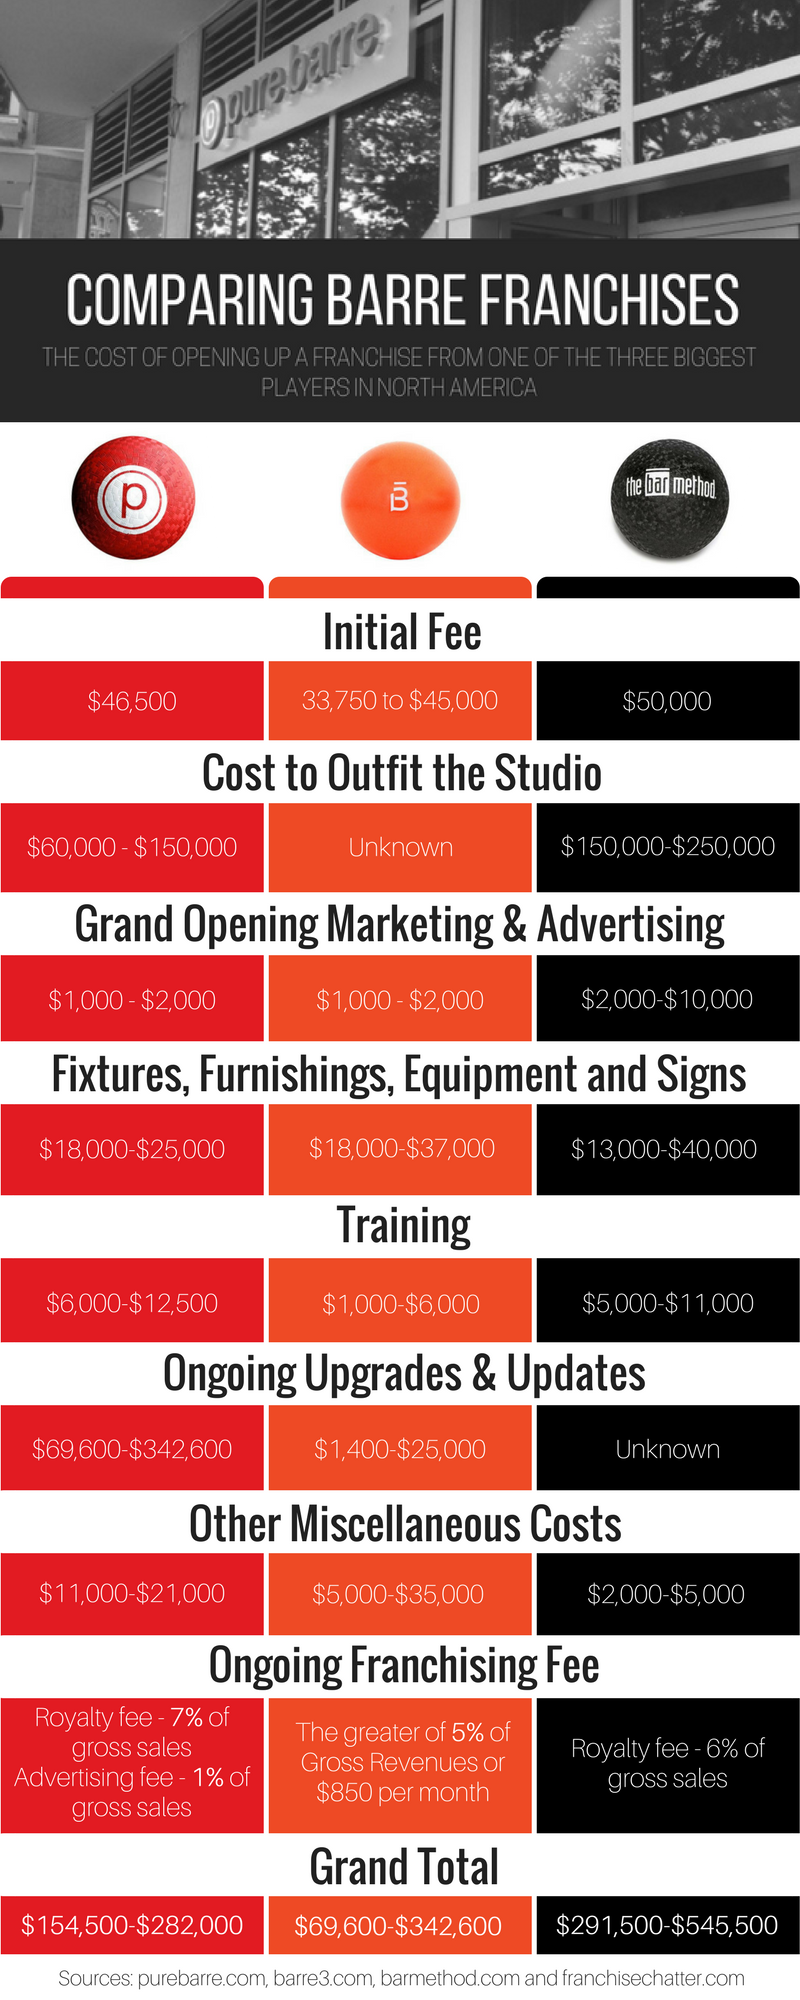 An infographic comparing barre franchise costs for Pure Barre, Barre3 and The Bar Method.